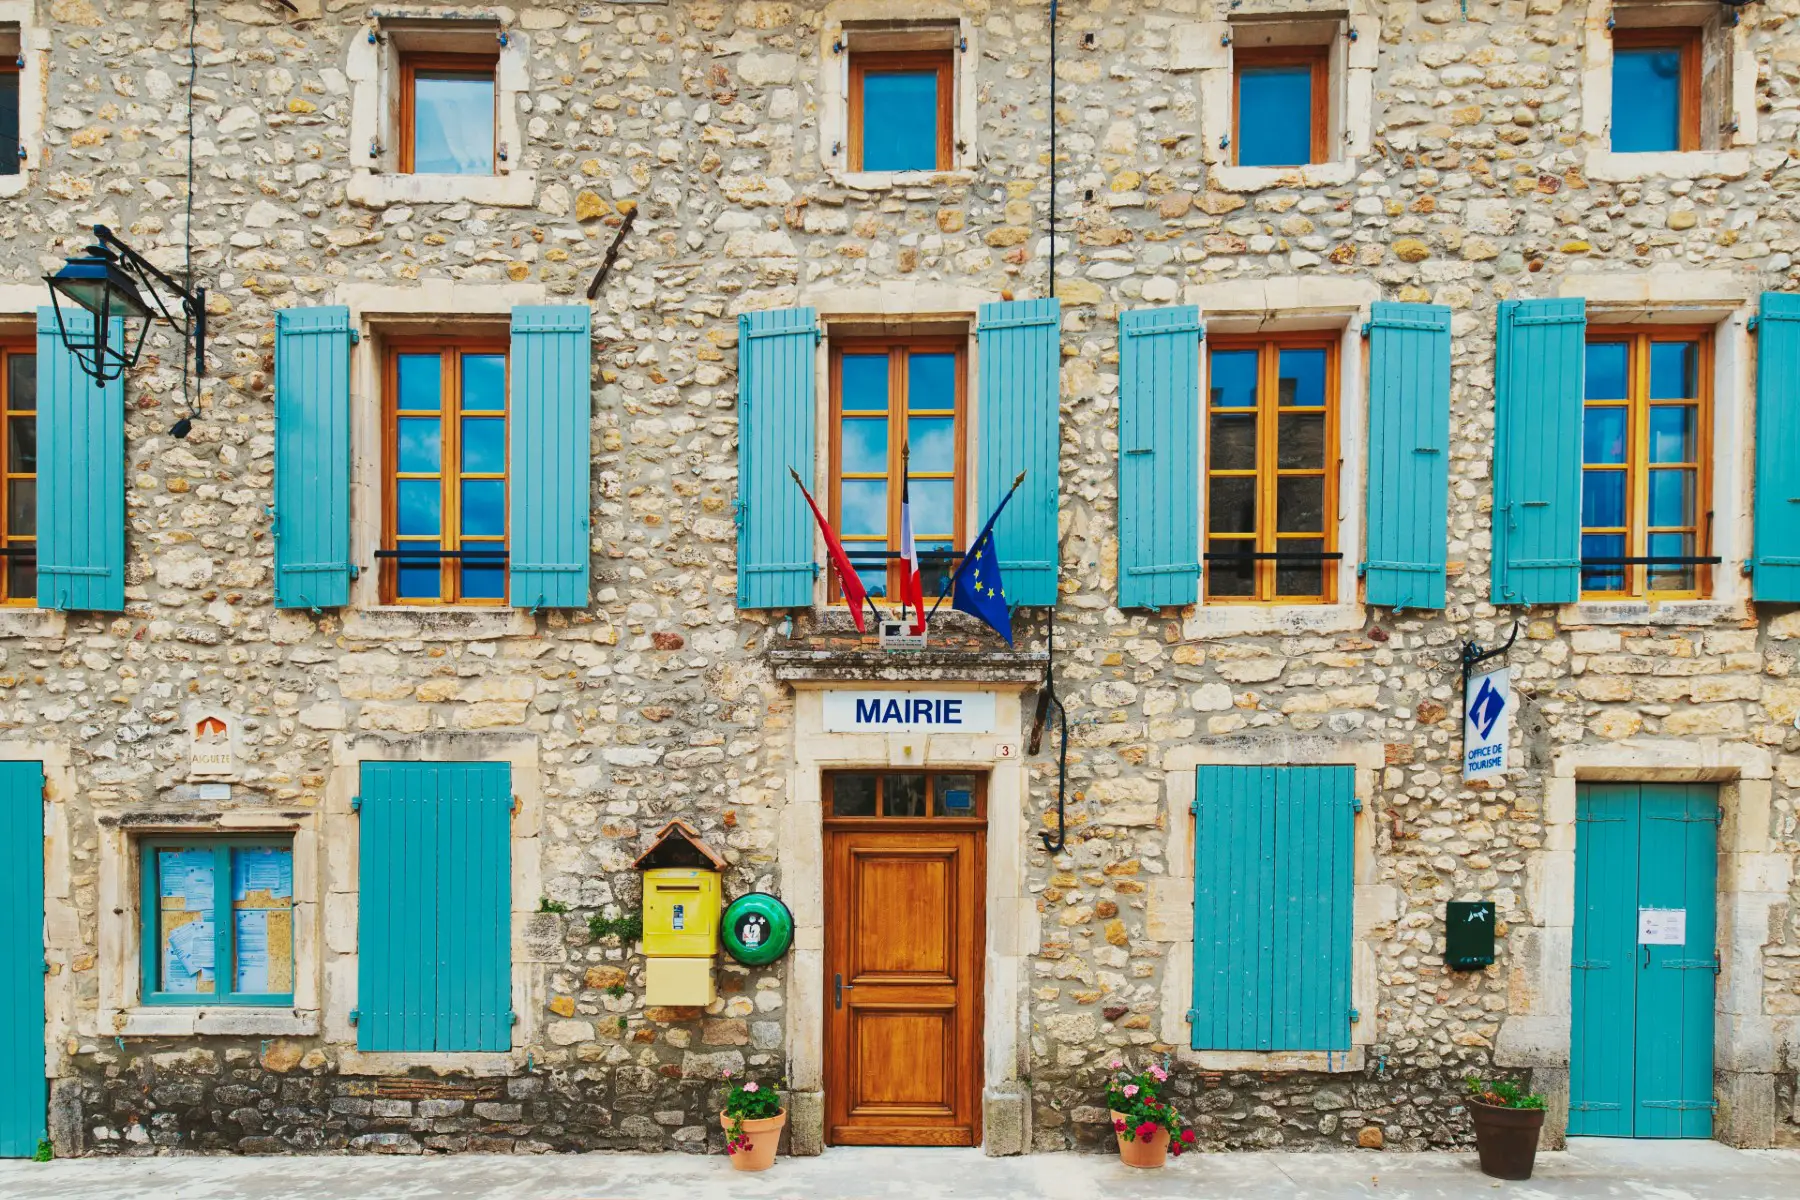 Town hall facade in France